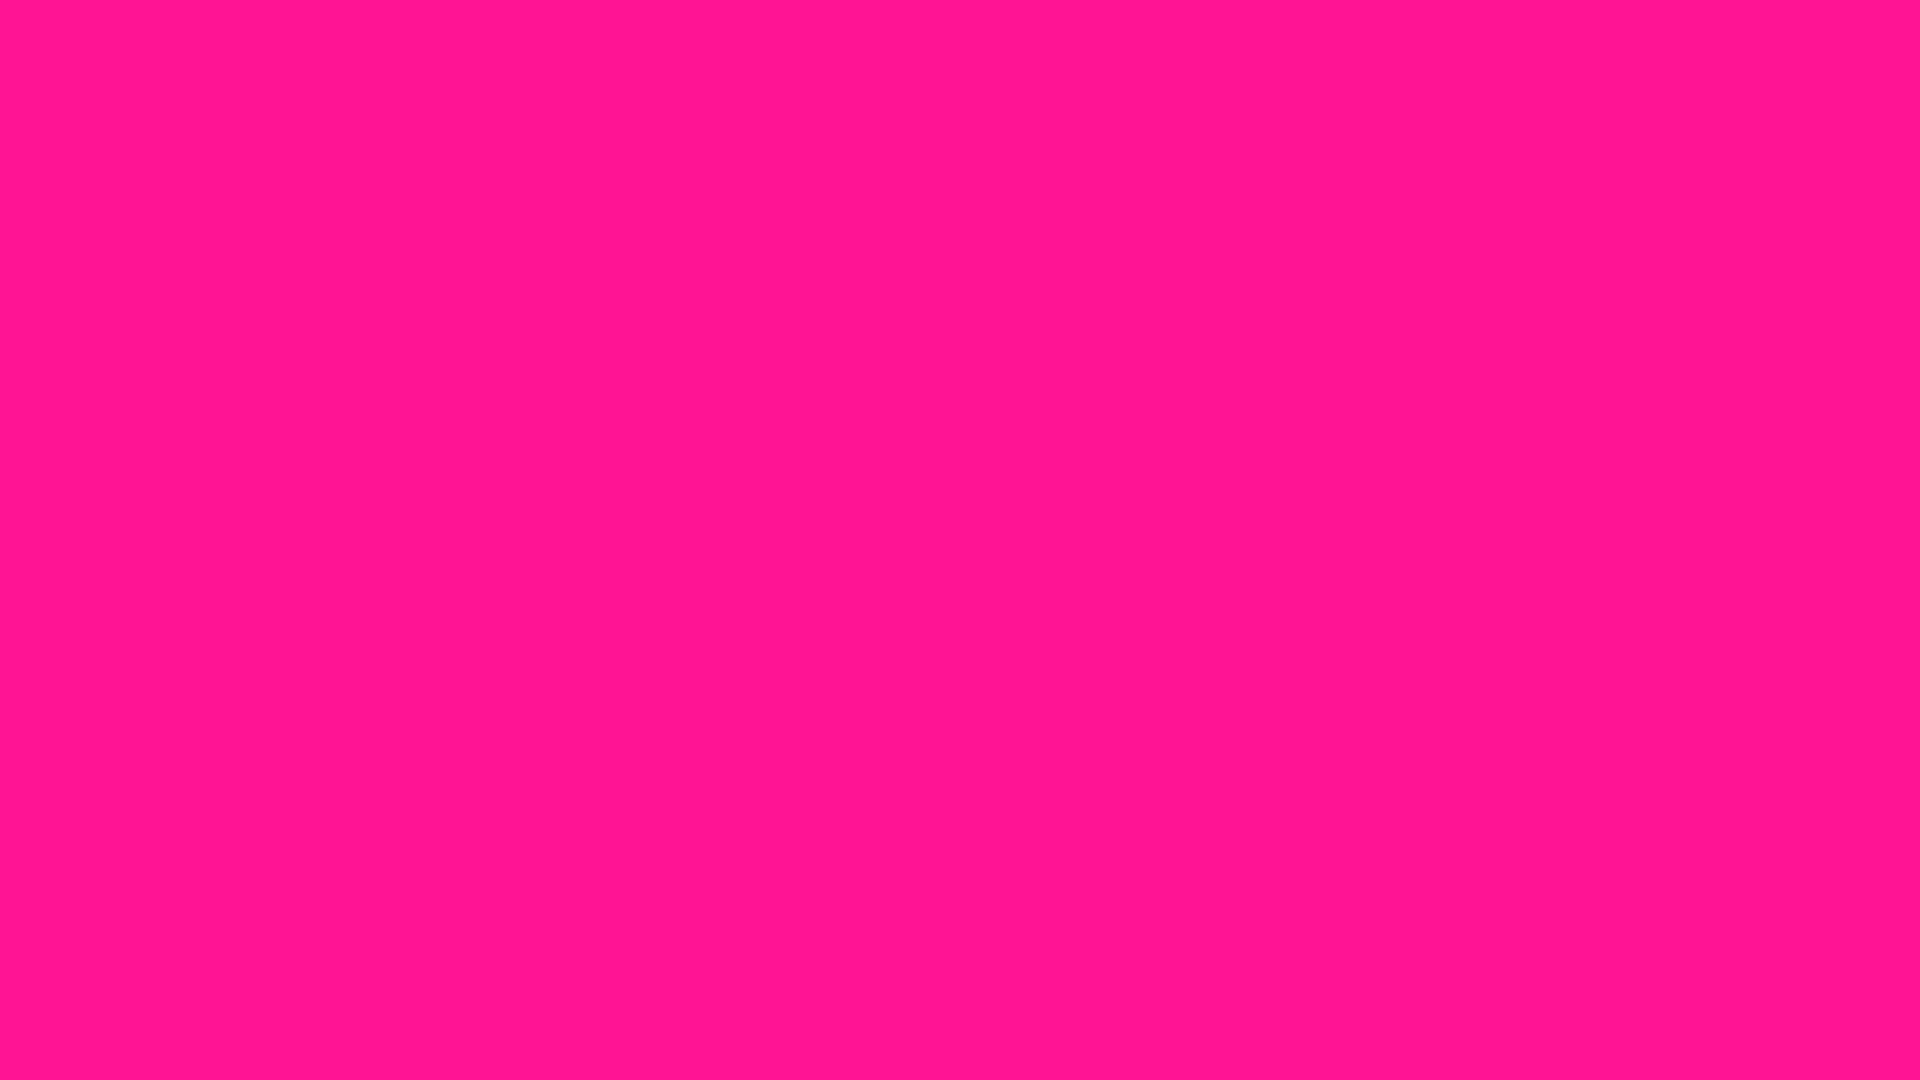 1920x1080 Fluorescent Pink Solid Color Background